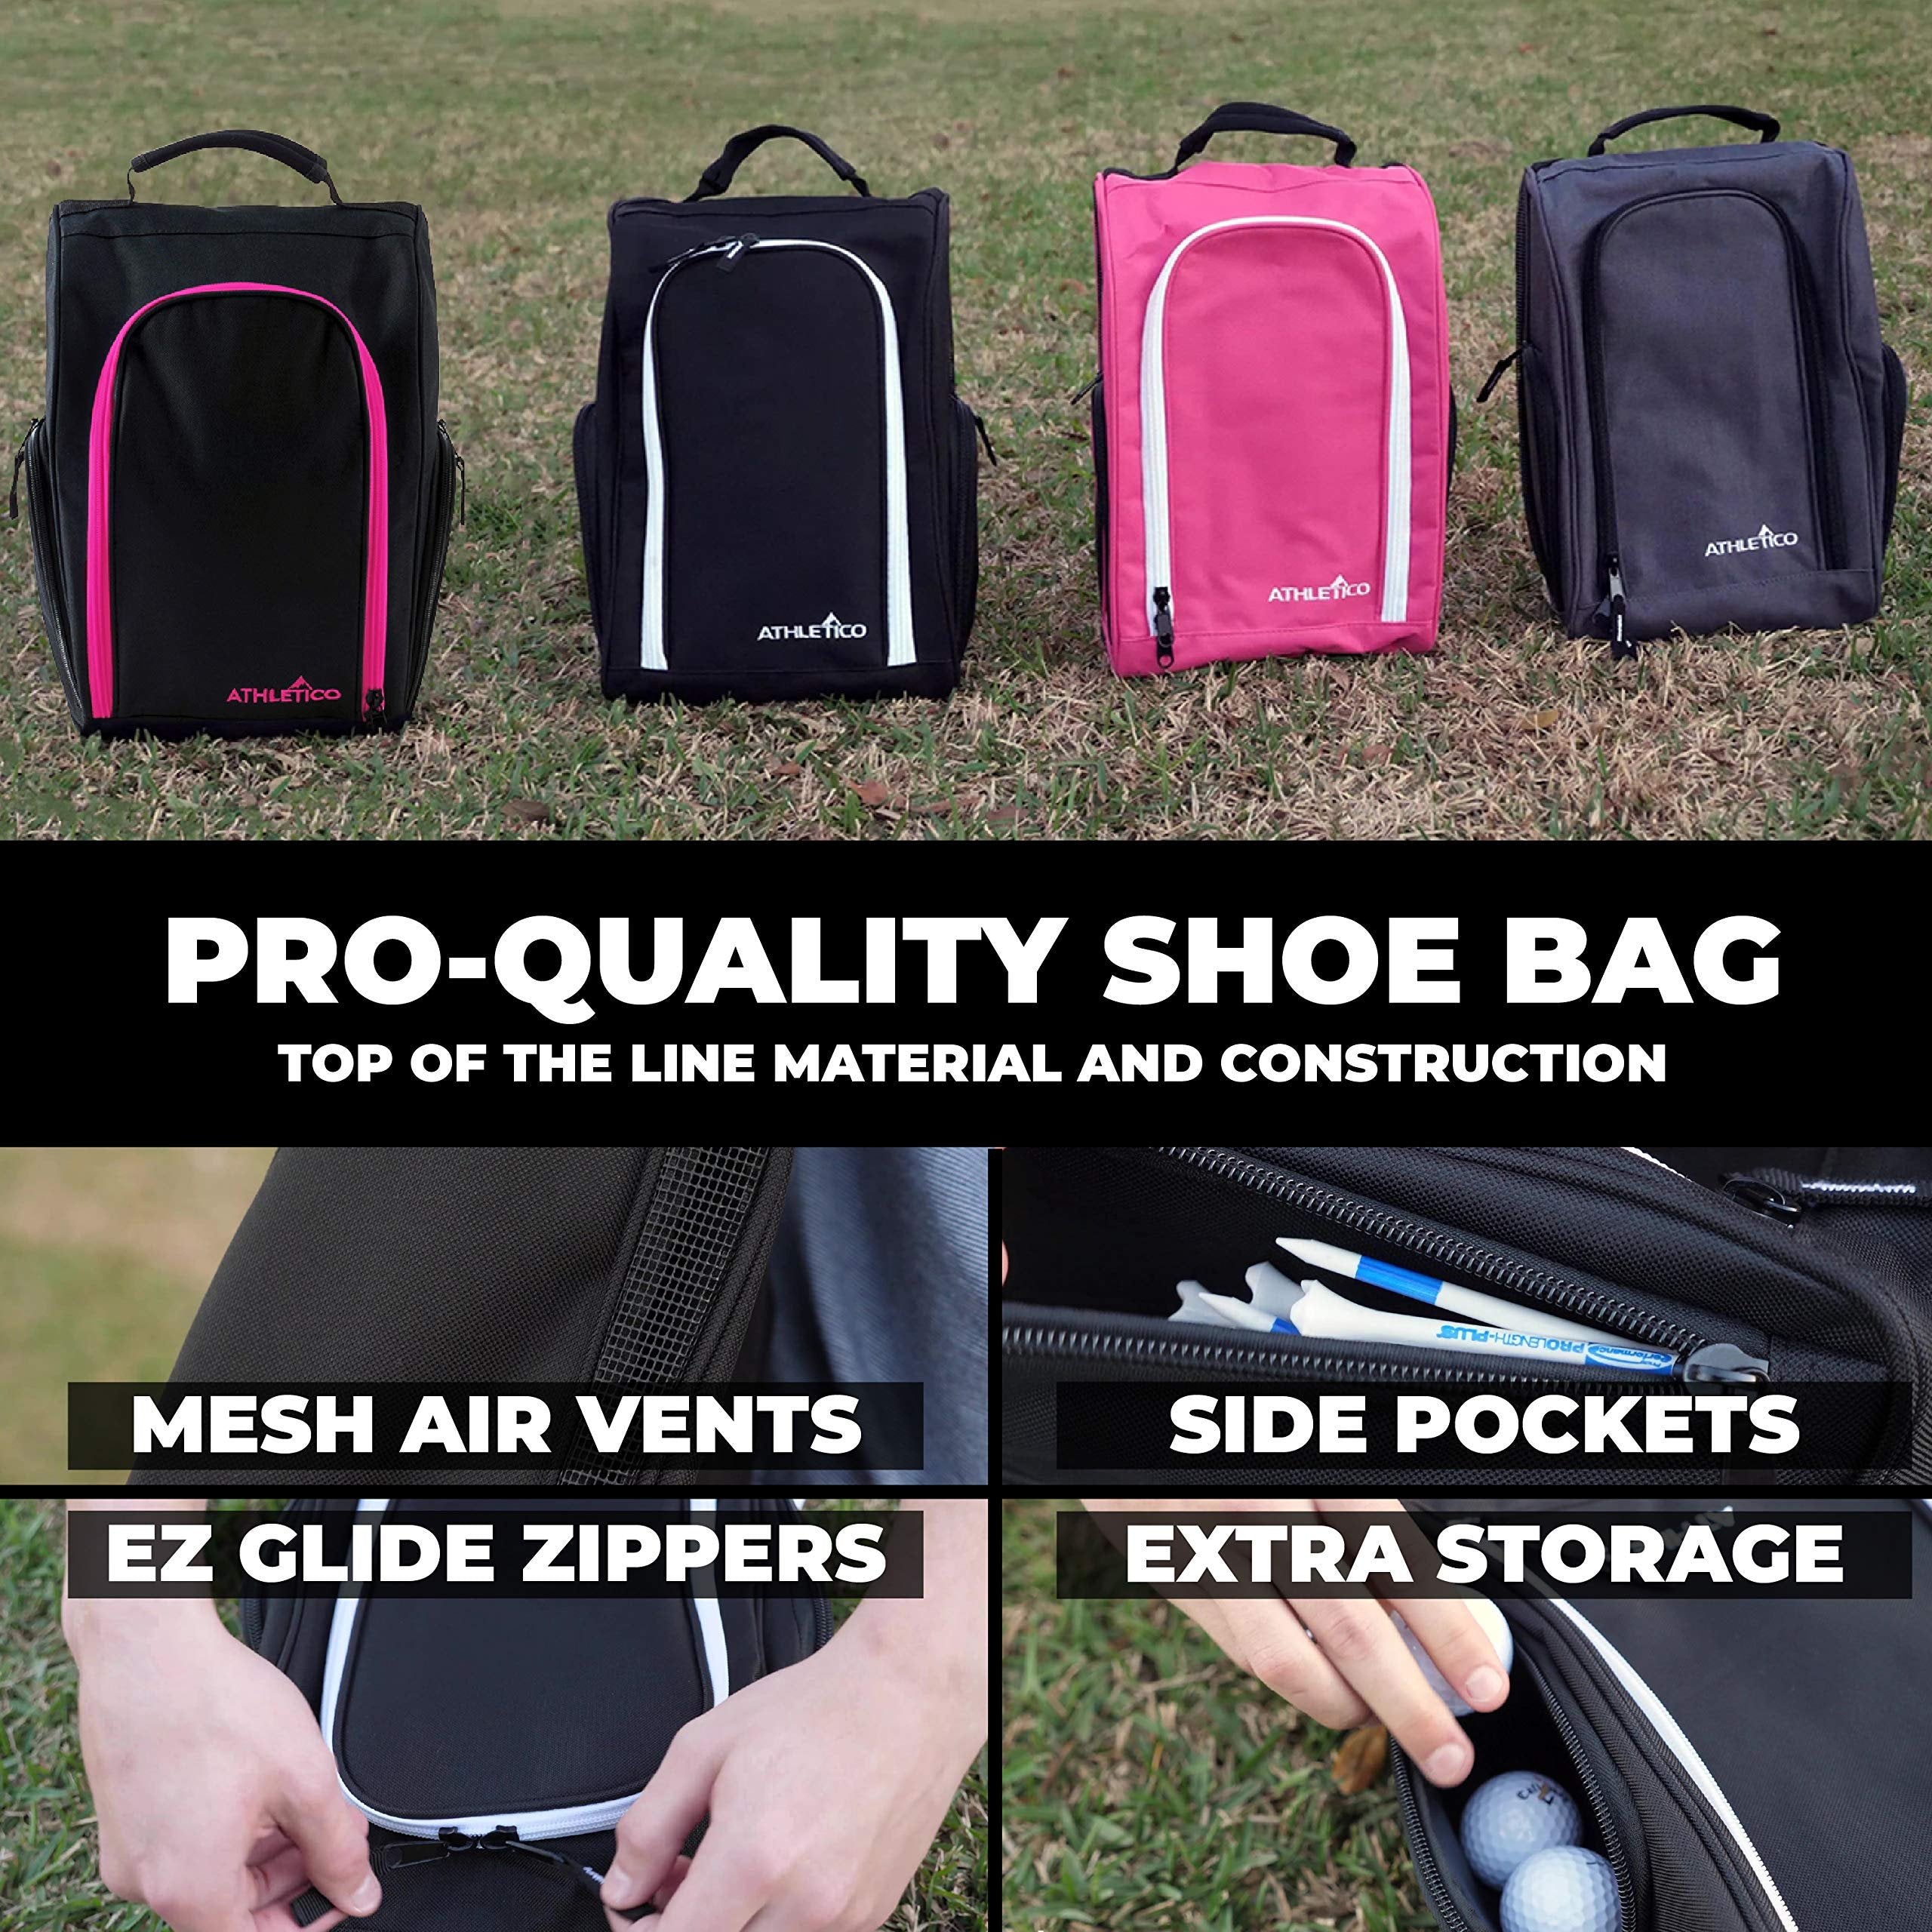 Athletico Golf Shoe Bag - Zippered Shoe Carrier Bags With Ventilation & Outside Pocket for Socks, Tees, etc. (Pink)